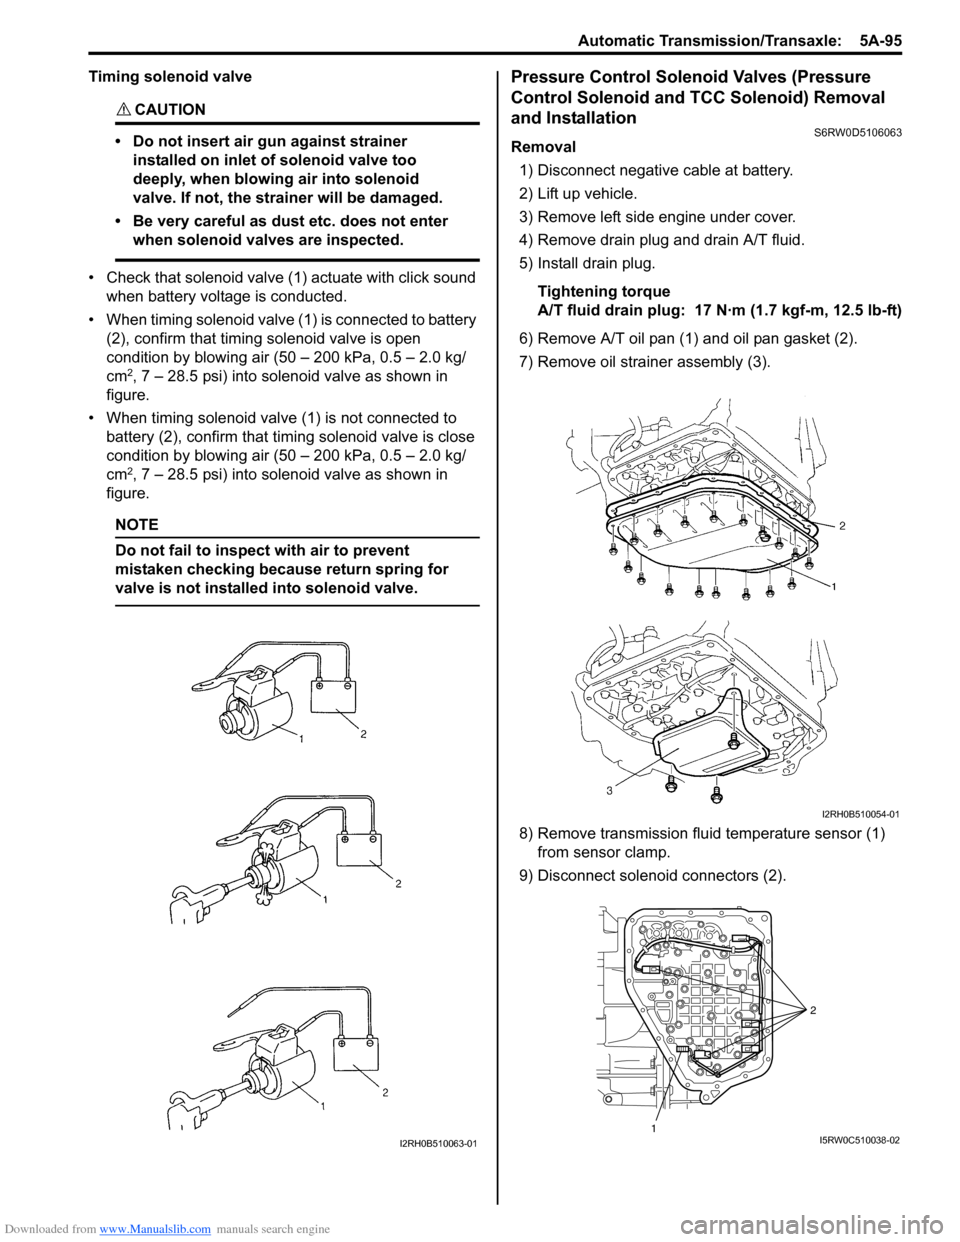 SUZUKI SX4 2006 1.G Service User Guide Downloaded from www.Manualslib.com manuals search engine Automatic Transmission/Transaxle:  5A-95
Timing solenoid valve
CAUTION! 
• Do not insert air gun against strainer 
installed on inlet of sole